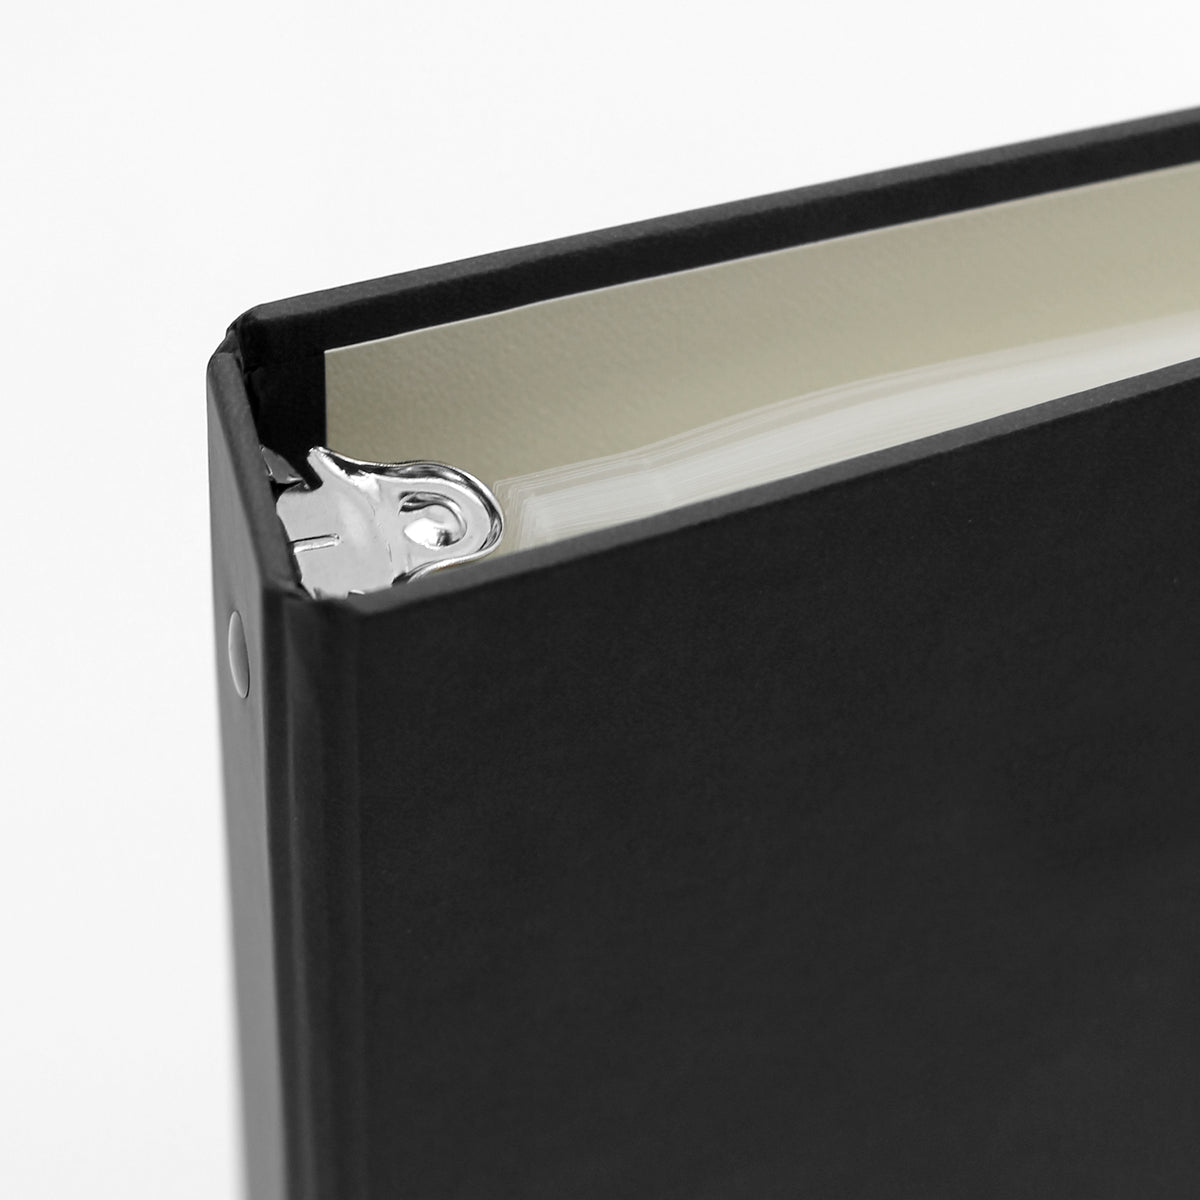 Storage Binder for Photos or Documents with Black Vegan Leather Cover